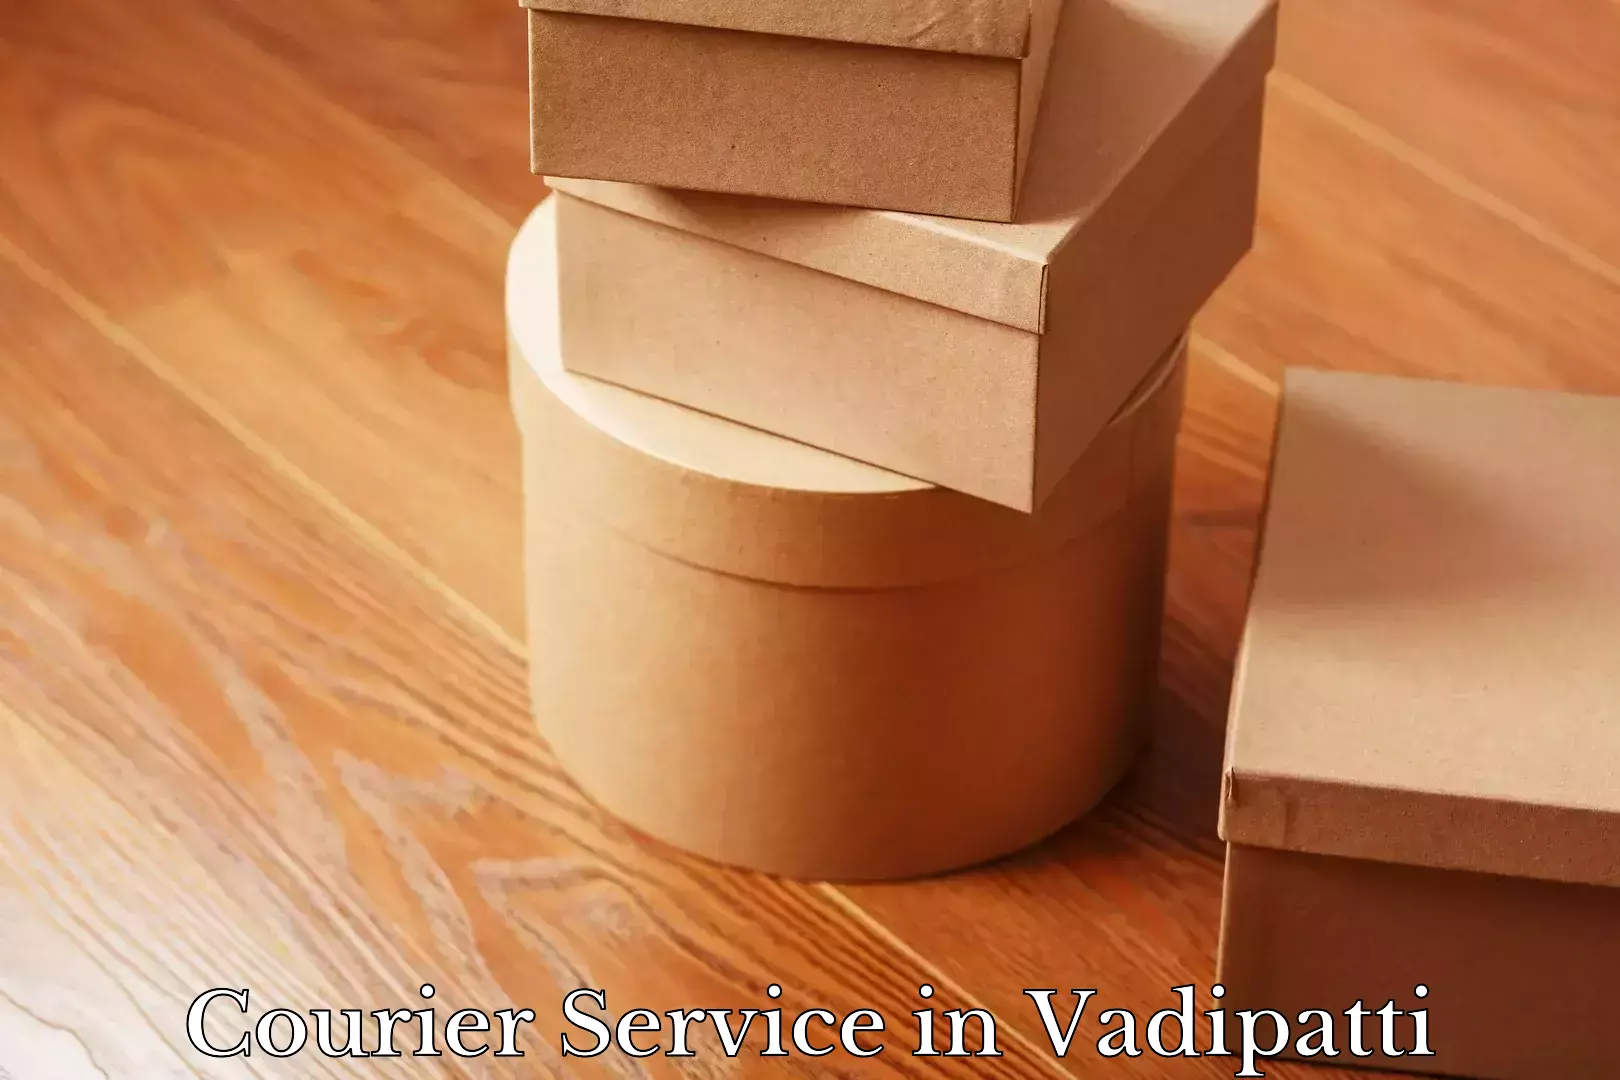 Express delivery capabilities in Vadipatti